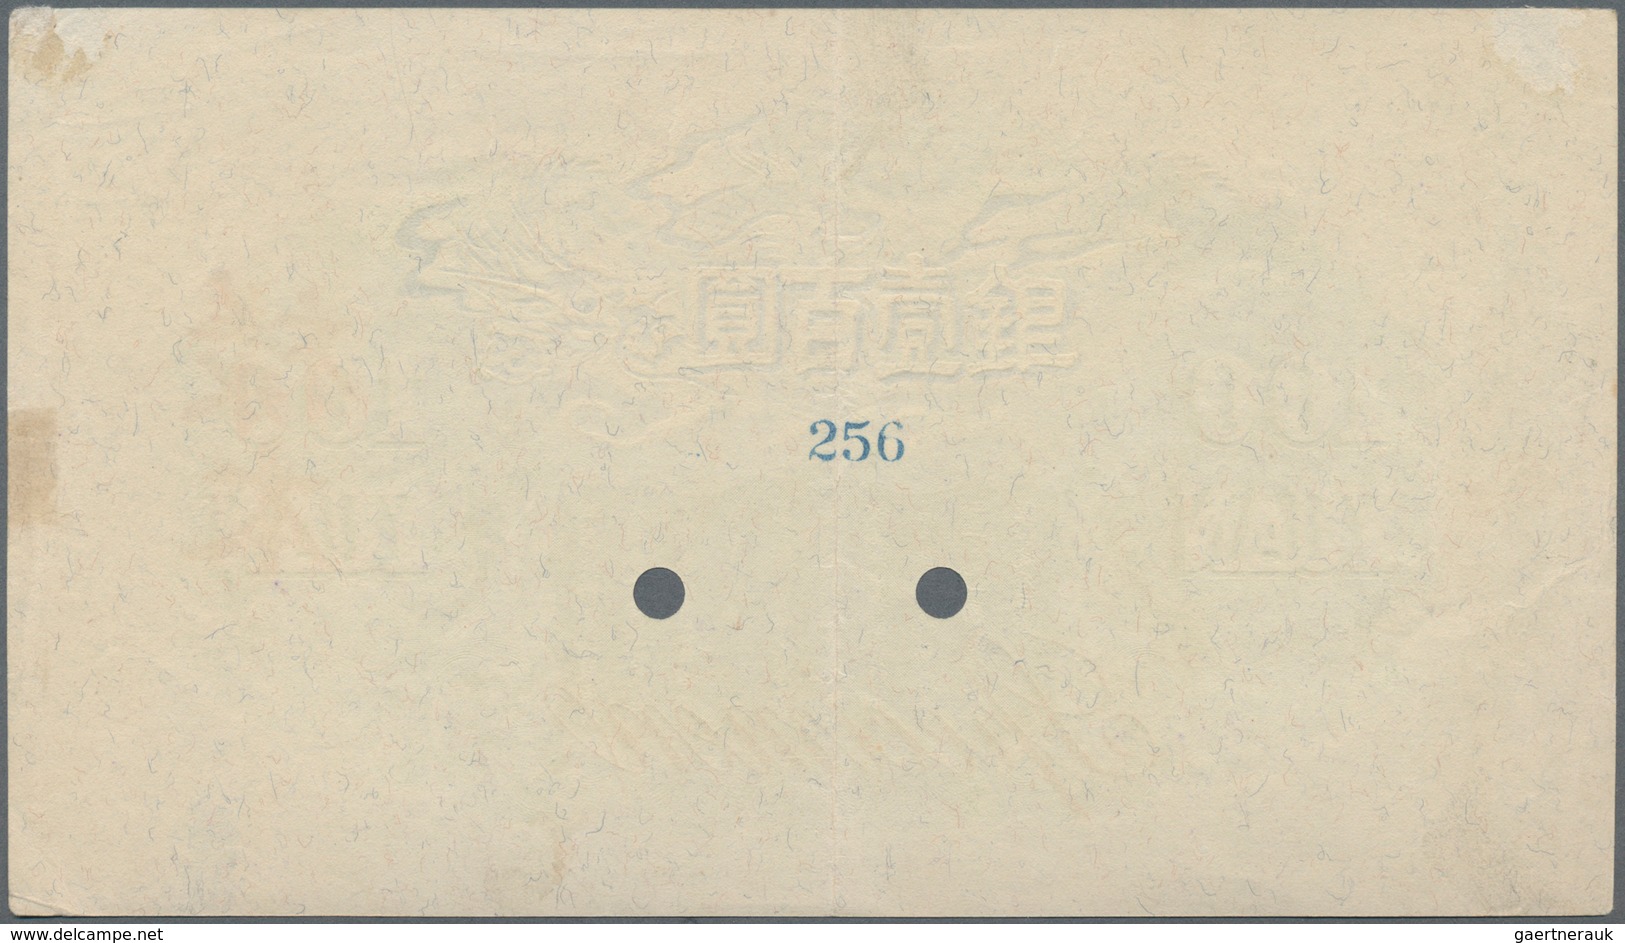 China: Central Bank Of Manchukuo 100 Yuan ND(1933) Reverse SPECIMEN, P.J128s With Specimen Number 25 - Chine